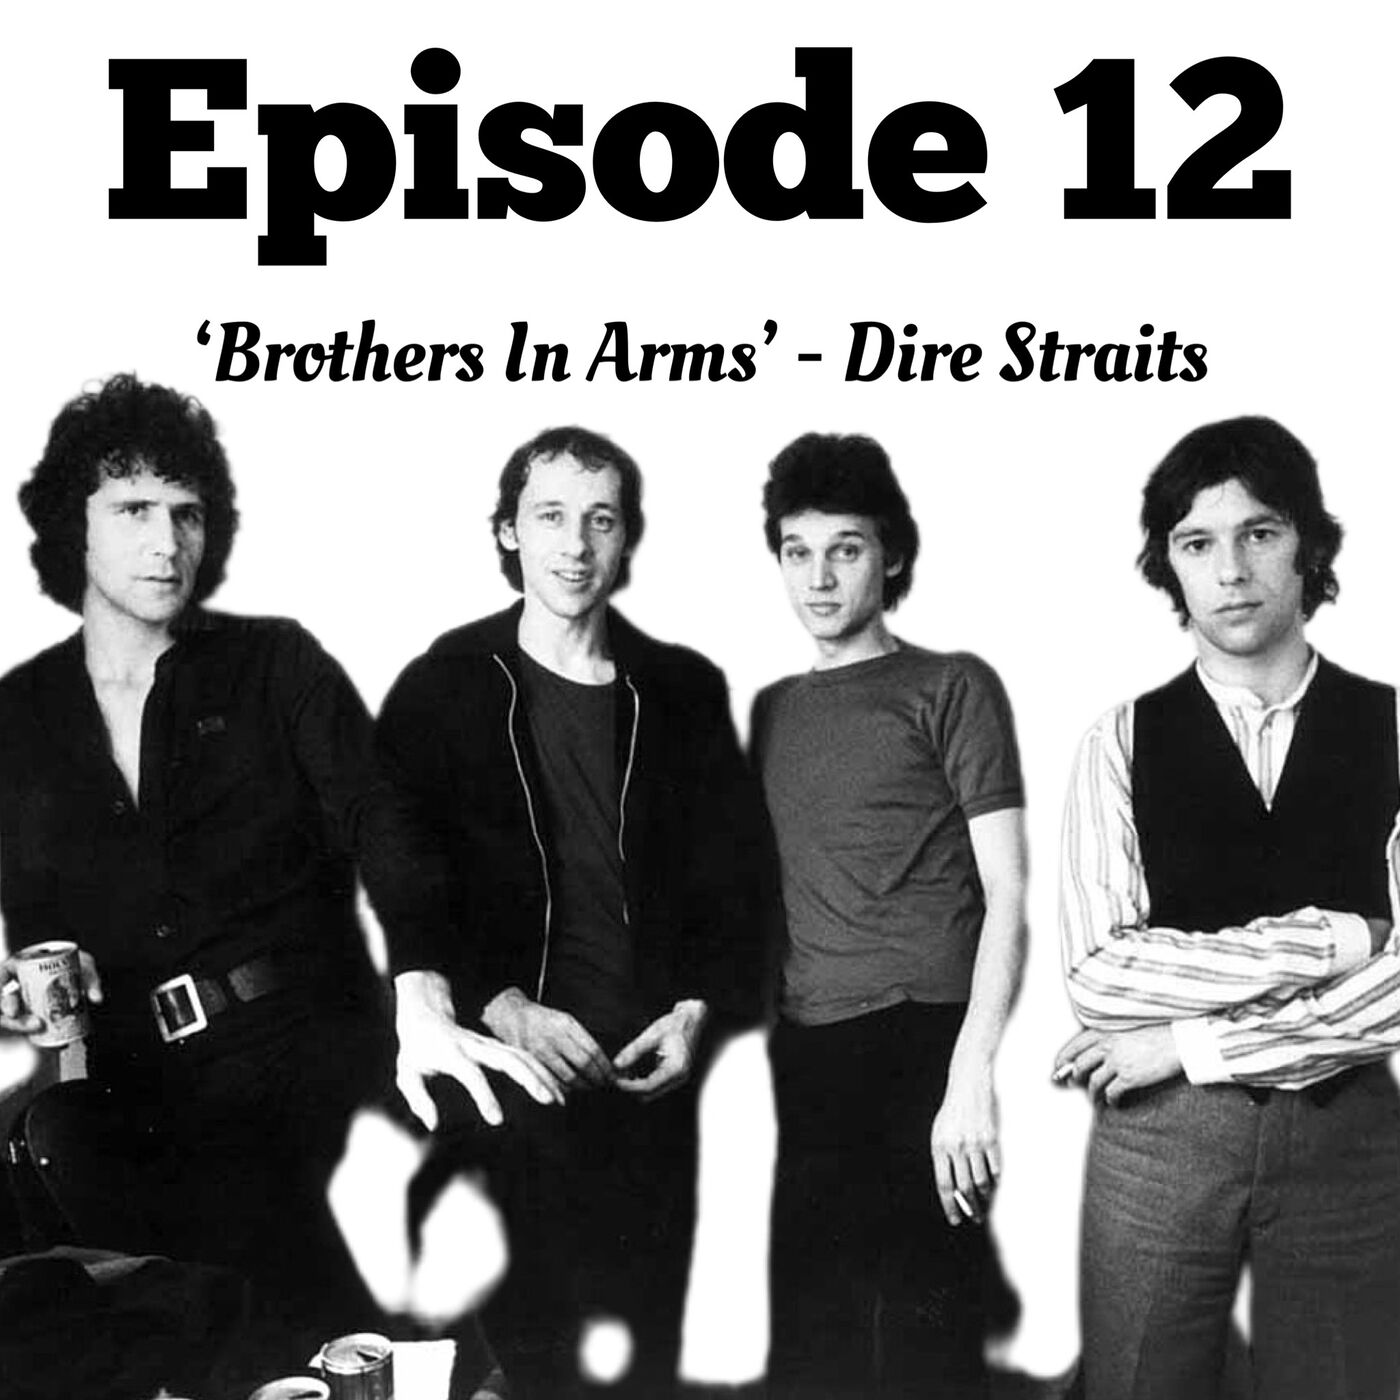 12. 'Brothers In Arms' - Dire Straits (1985)